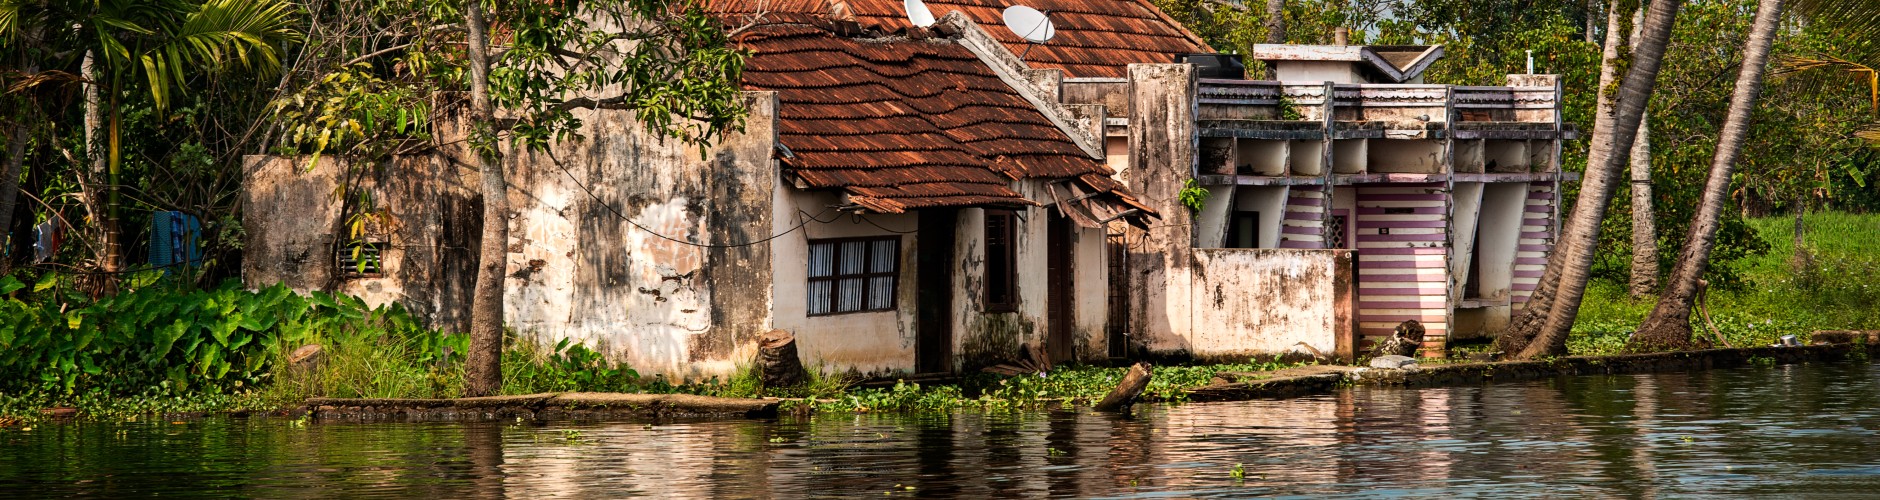 Side view of a house near water